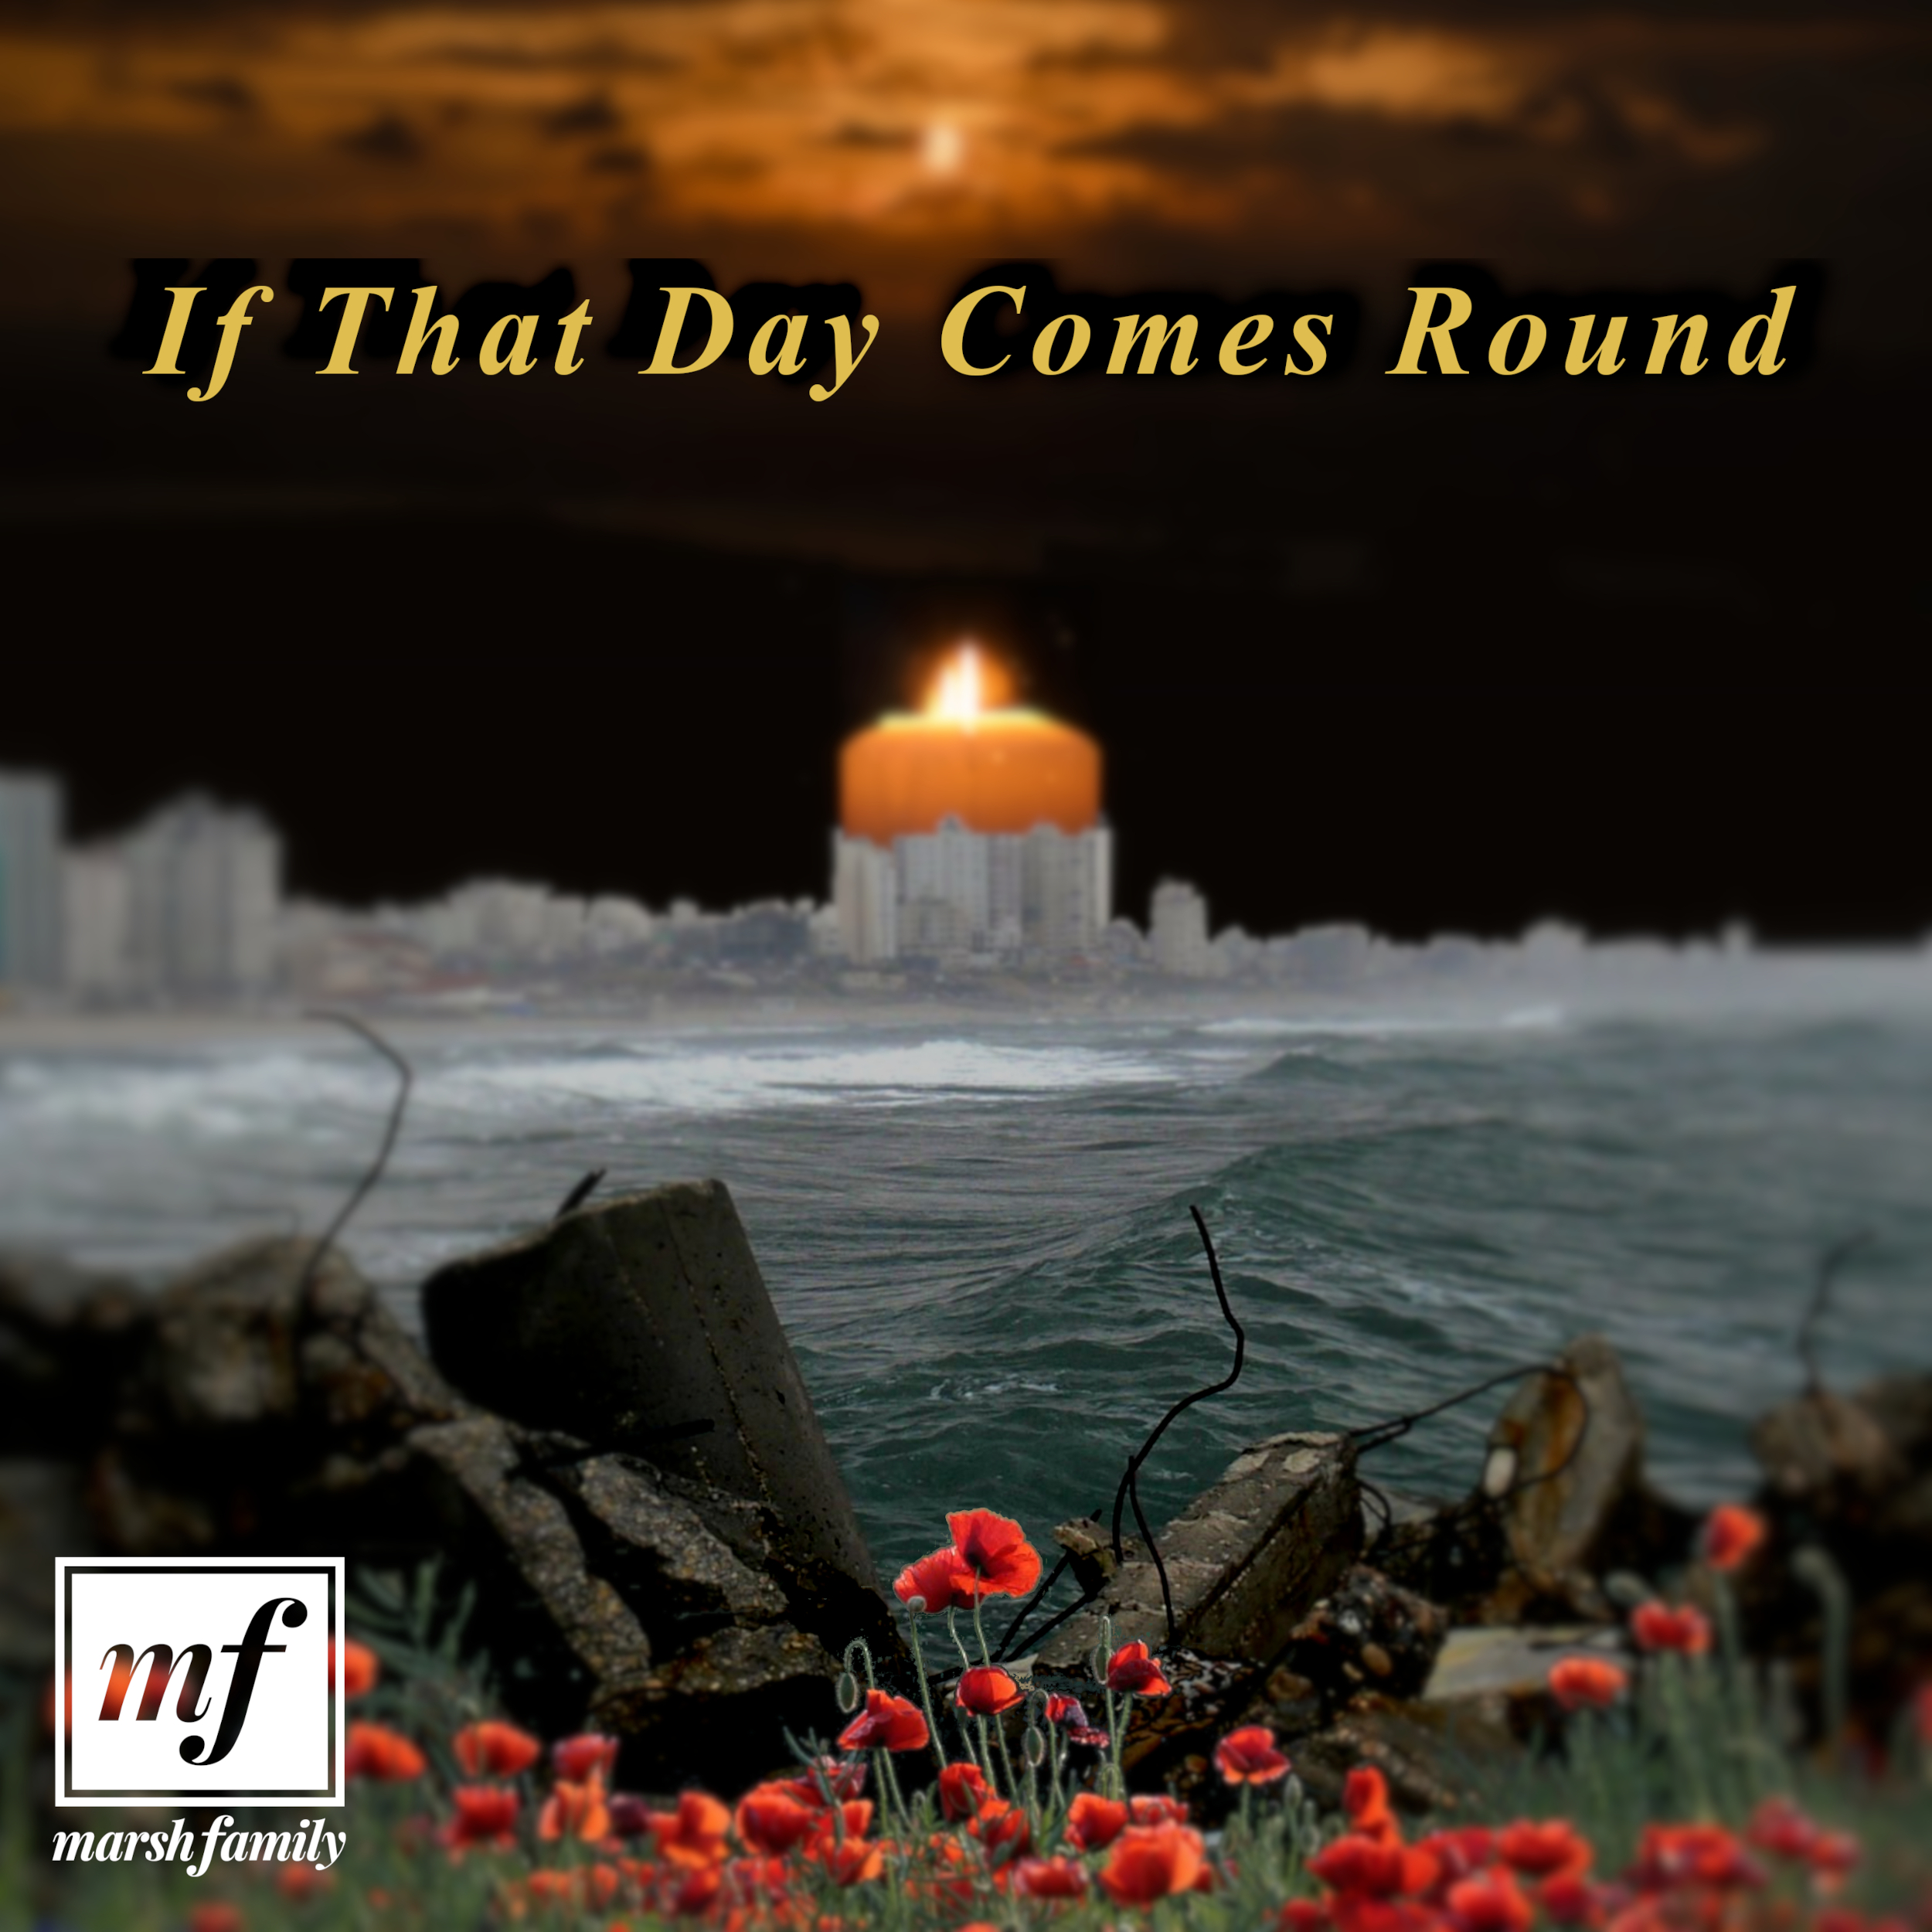 The Marsh Family calls for peace with inspirational new song “If That Day Comes Round”.